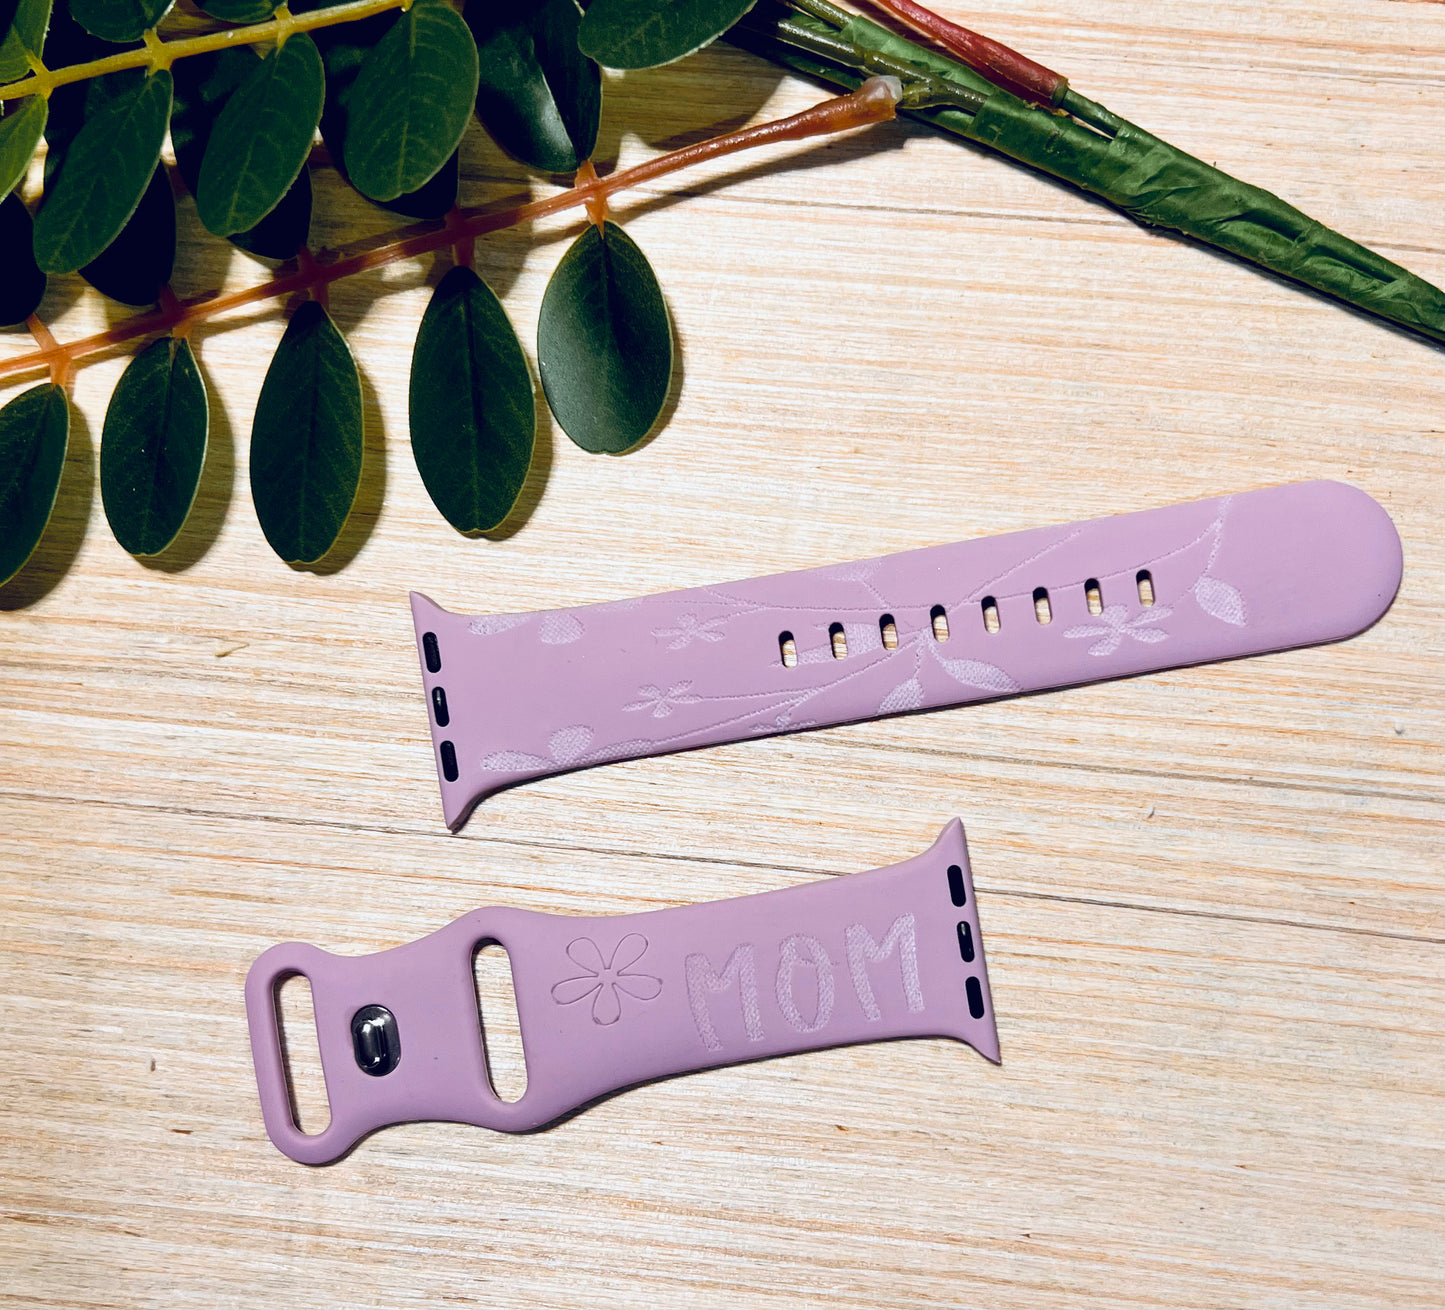 Silicone Watch Band